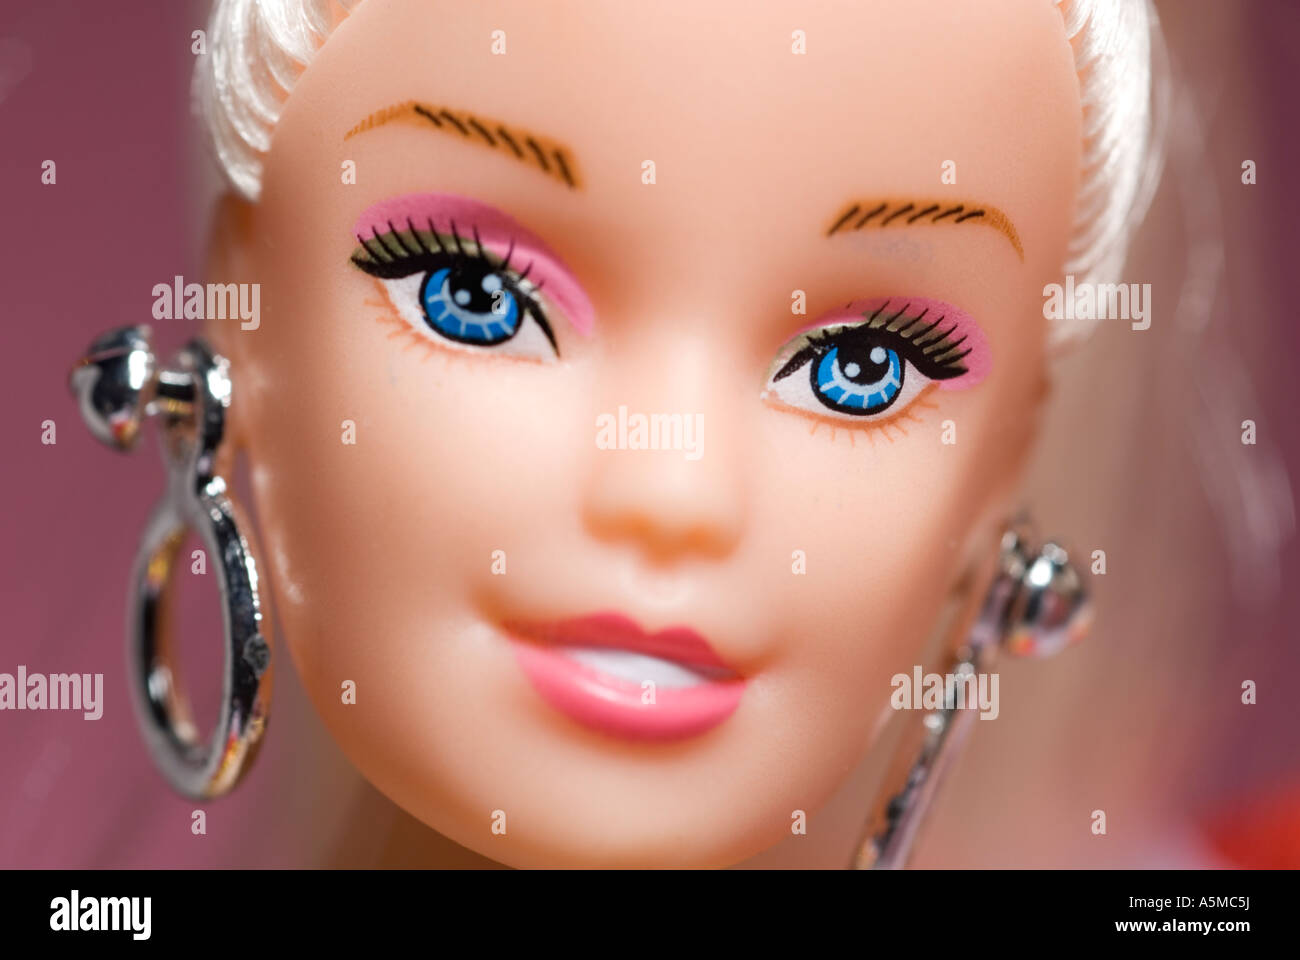 single doll face close up pink background Stock Photo